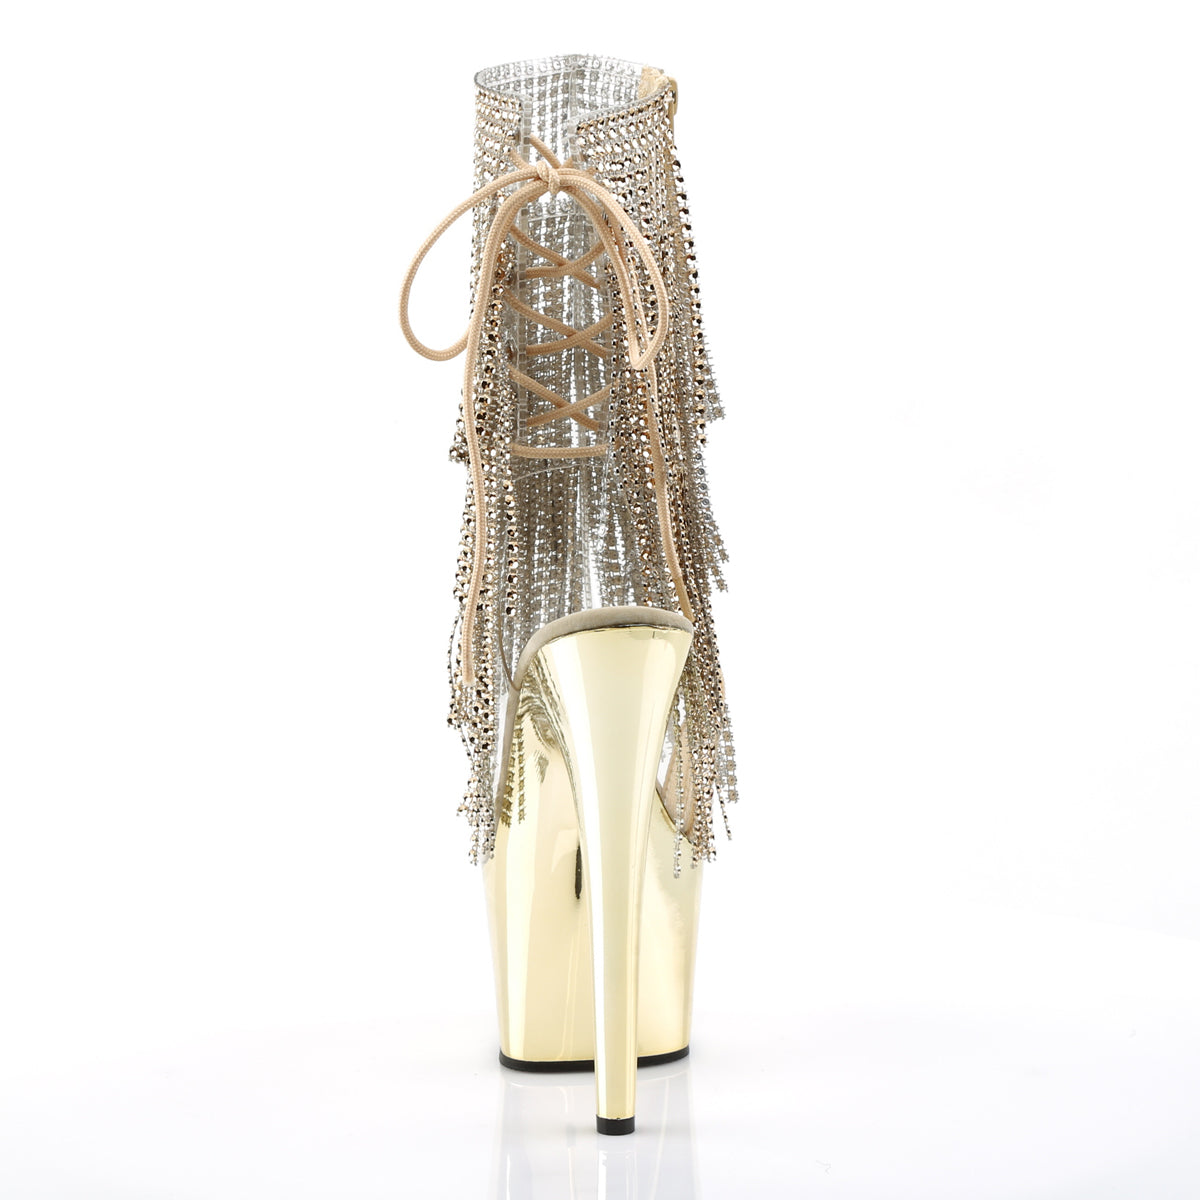 ADORE-1017RSF Pleaser Clear-Gold/Gold Chrome Platform Shoes [Sexy Footwear]